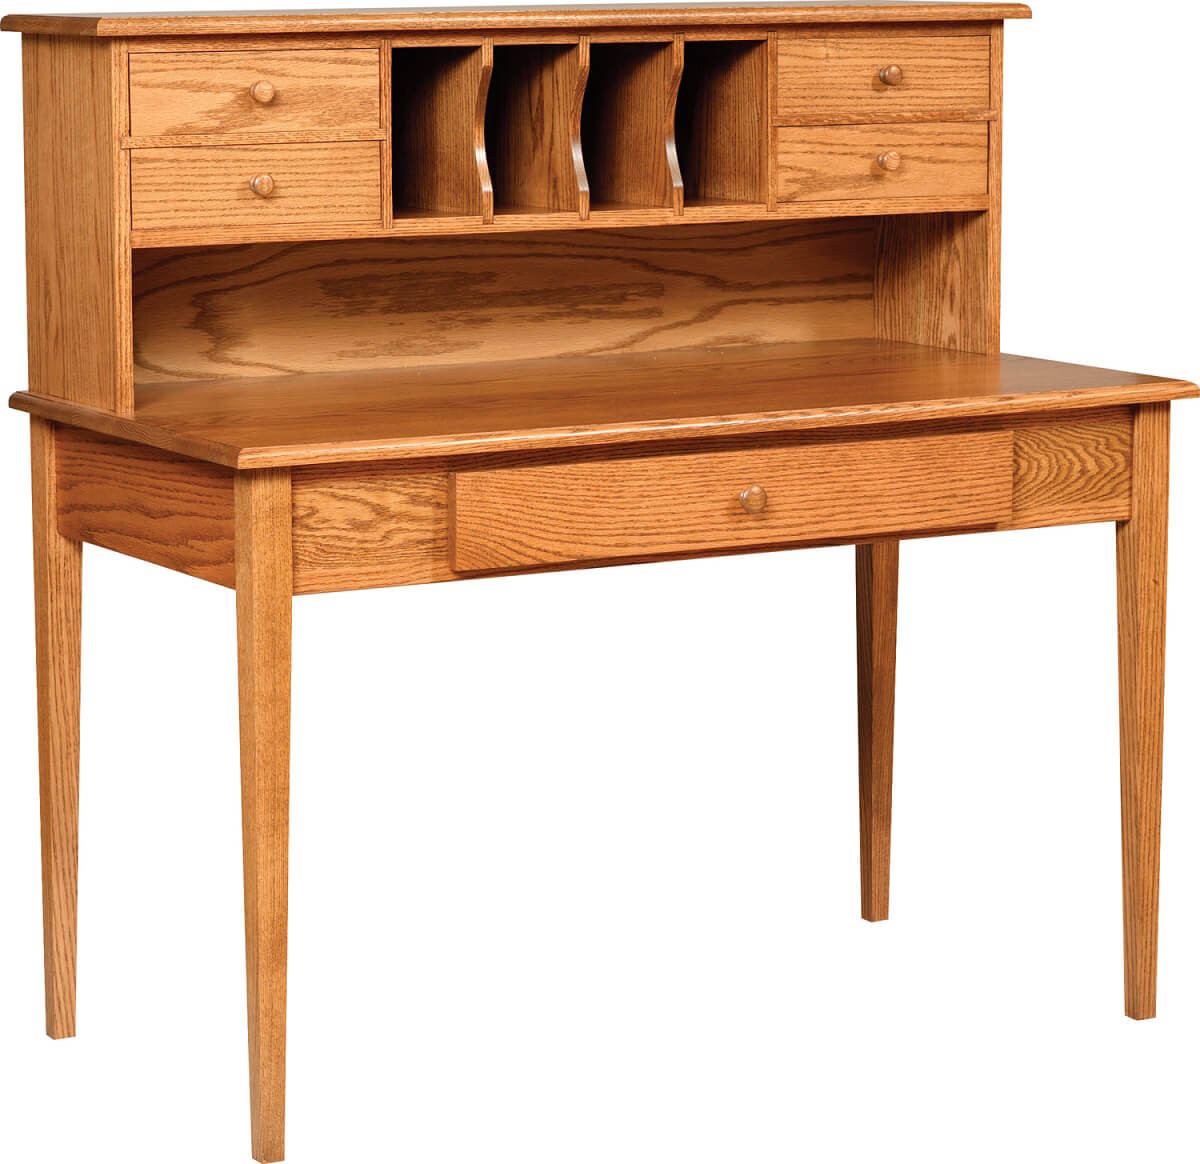 Everglades Rustic Solid Executive Writing Desk with Small Hutch.